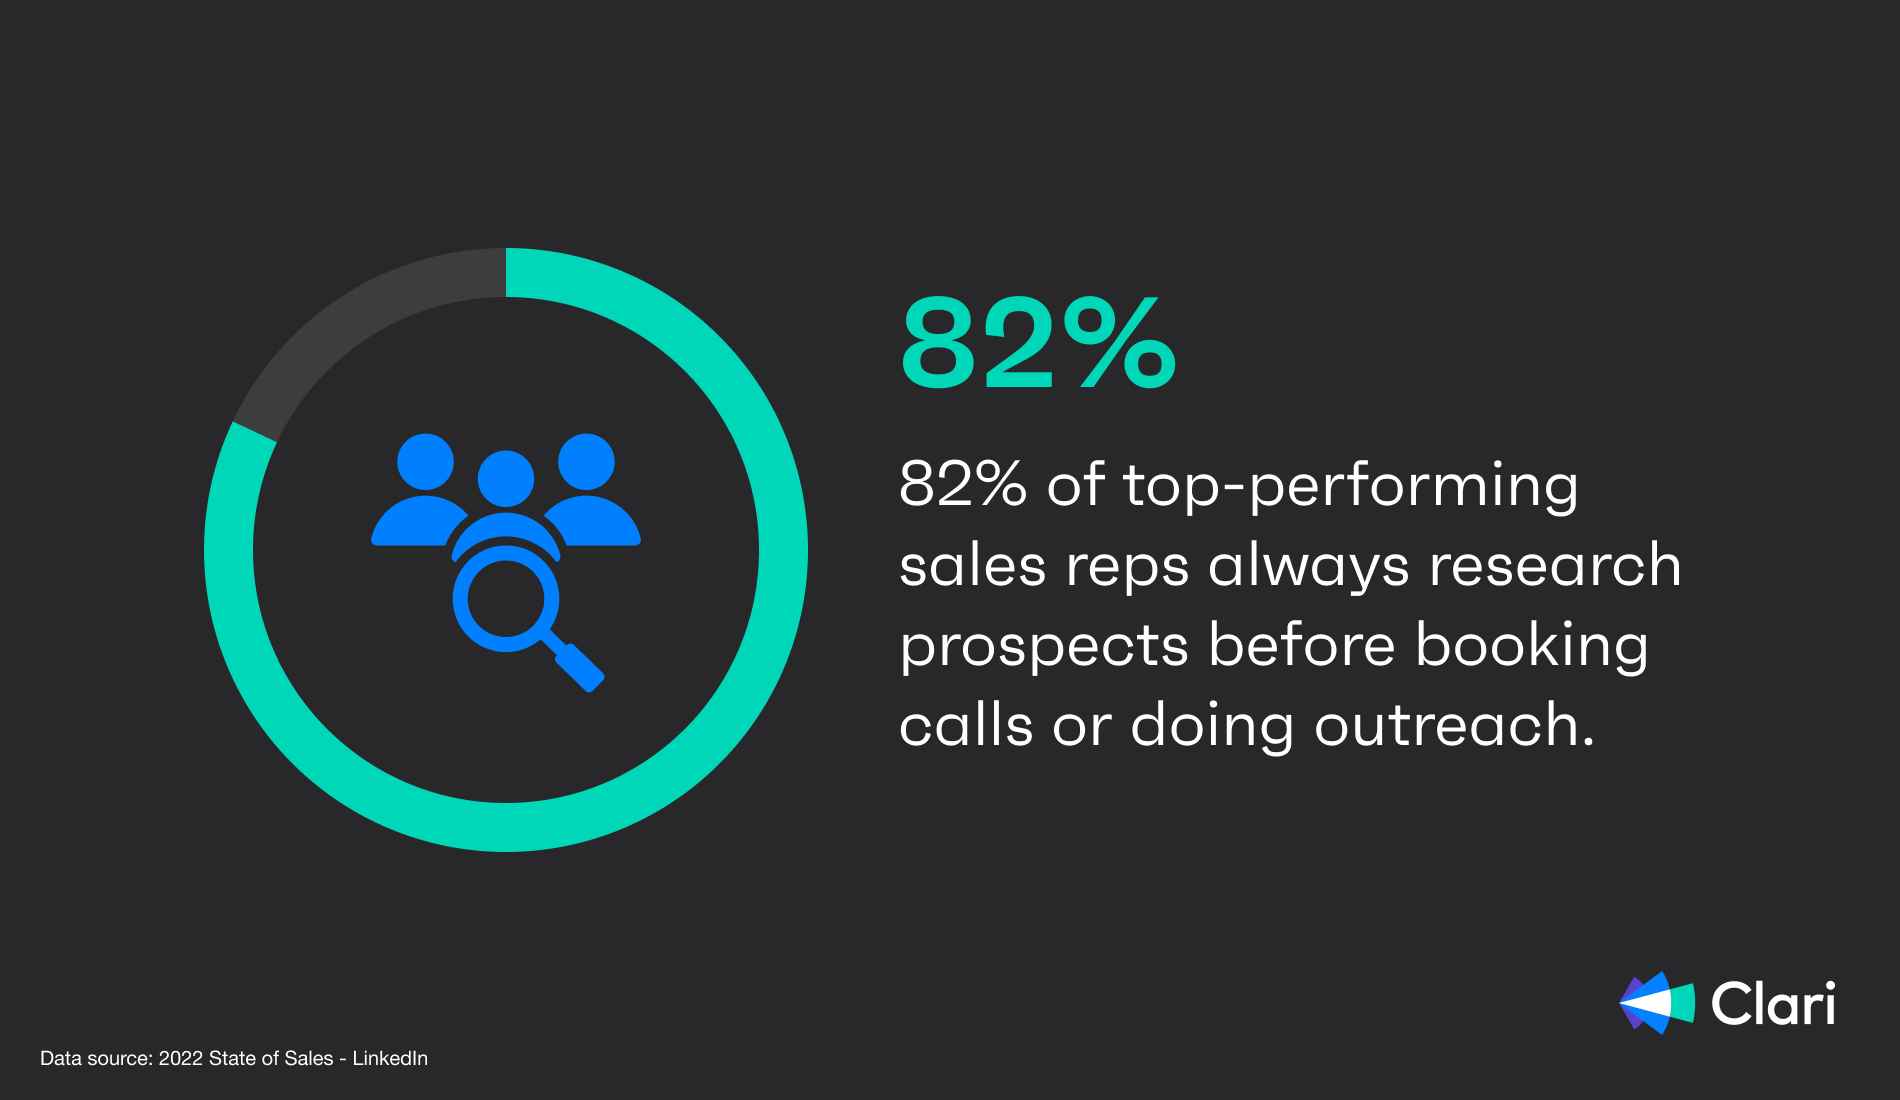 Illustrated statistic on the importance of research during sales prospecting